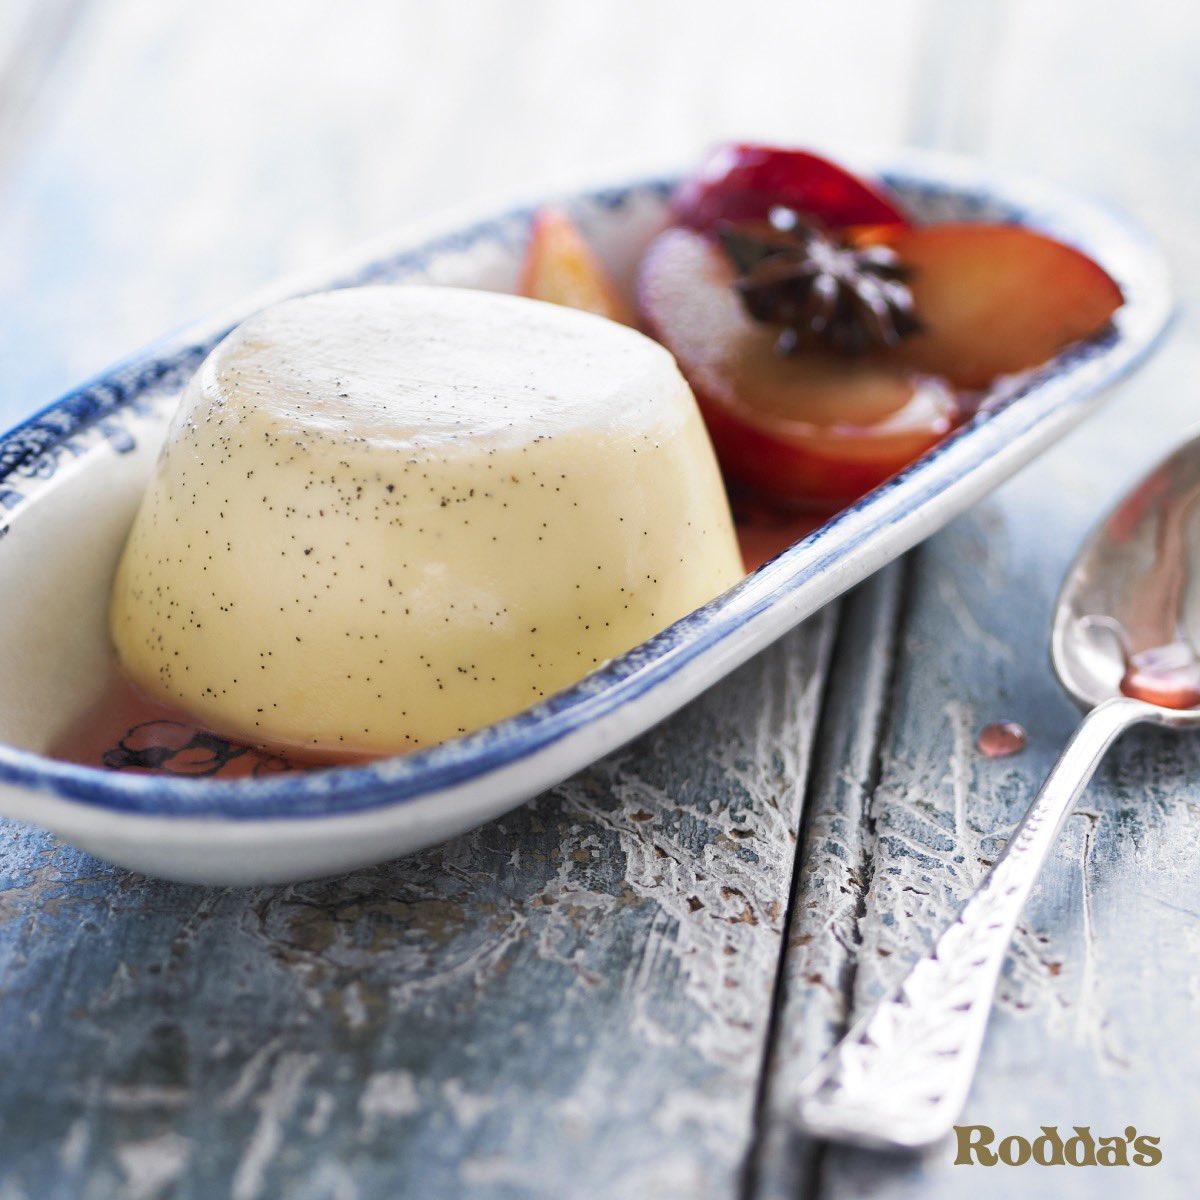 From panna cotta and chocolate pots to tarts, trifles and sticky toffee pud, see in the New Year in the most delicious way with our dessert recipes, made wonderful with Rodda’s Cornish Clotted Cream.